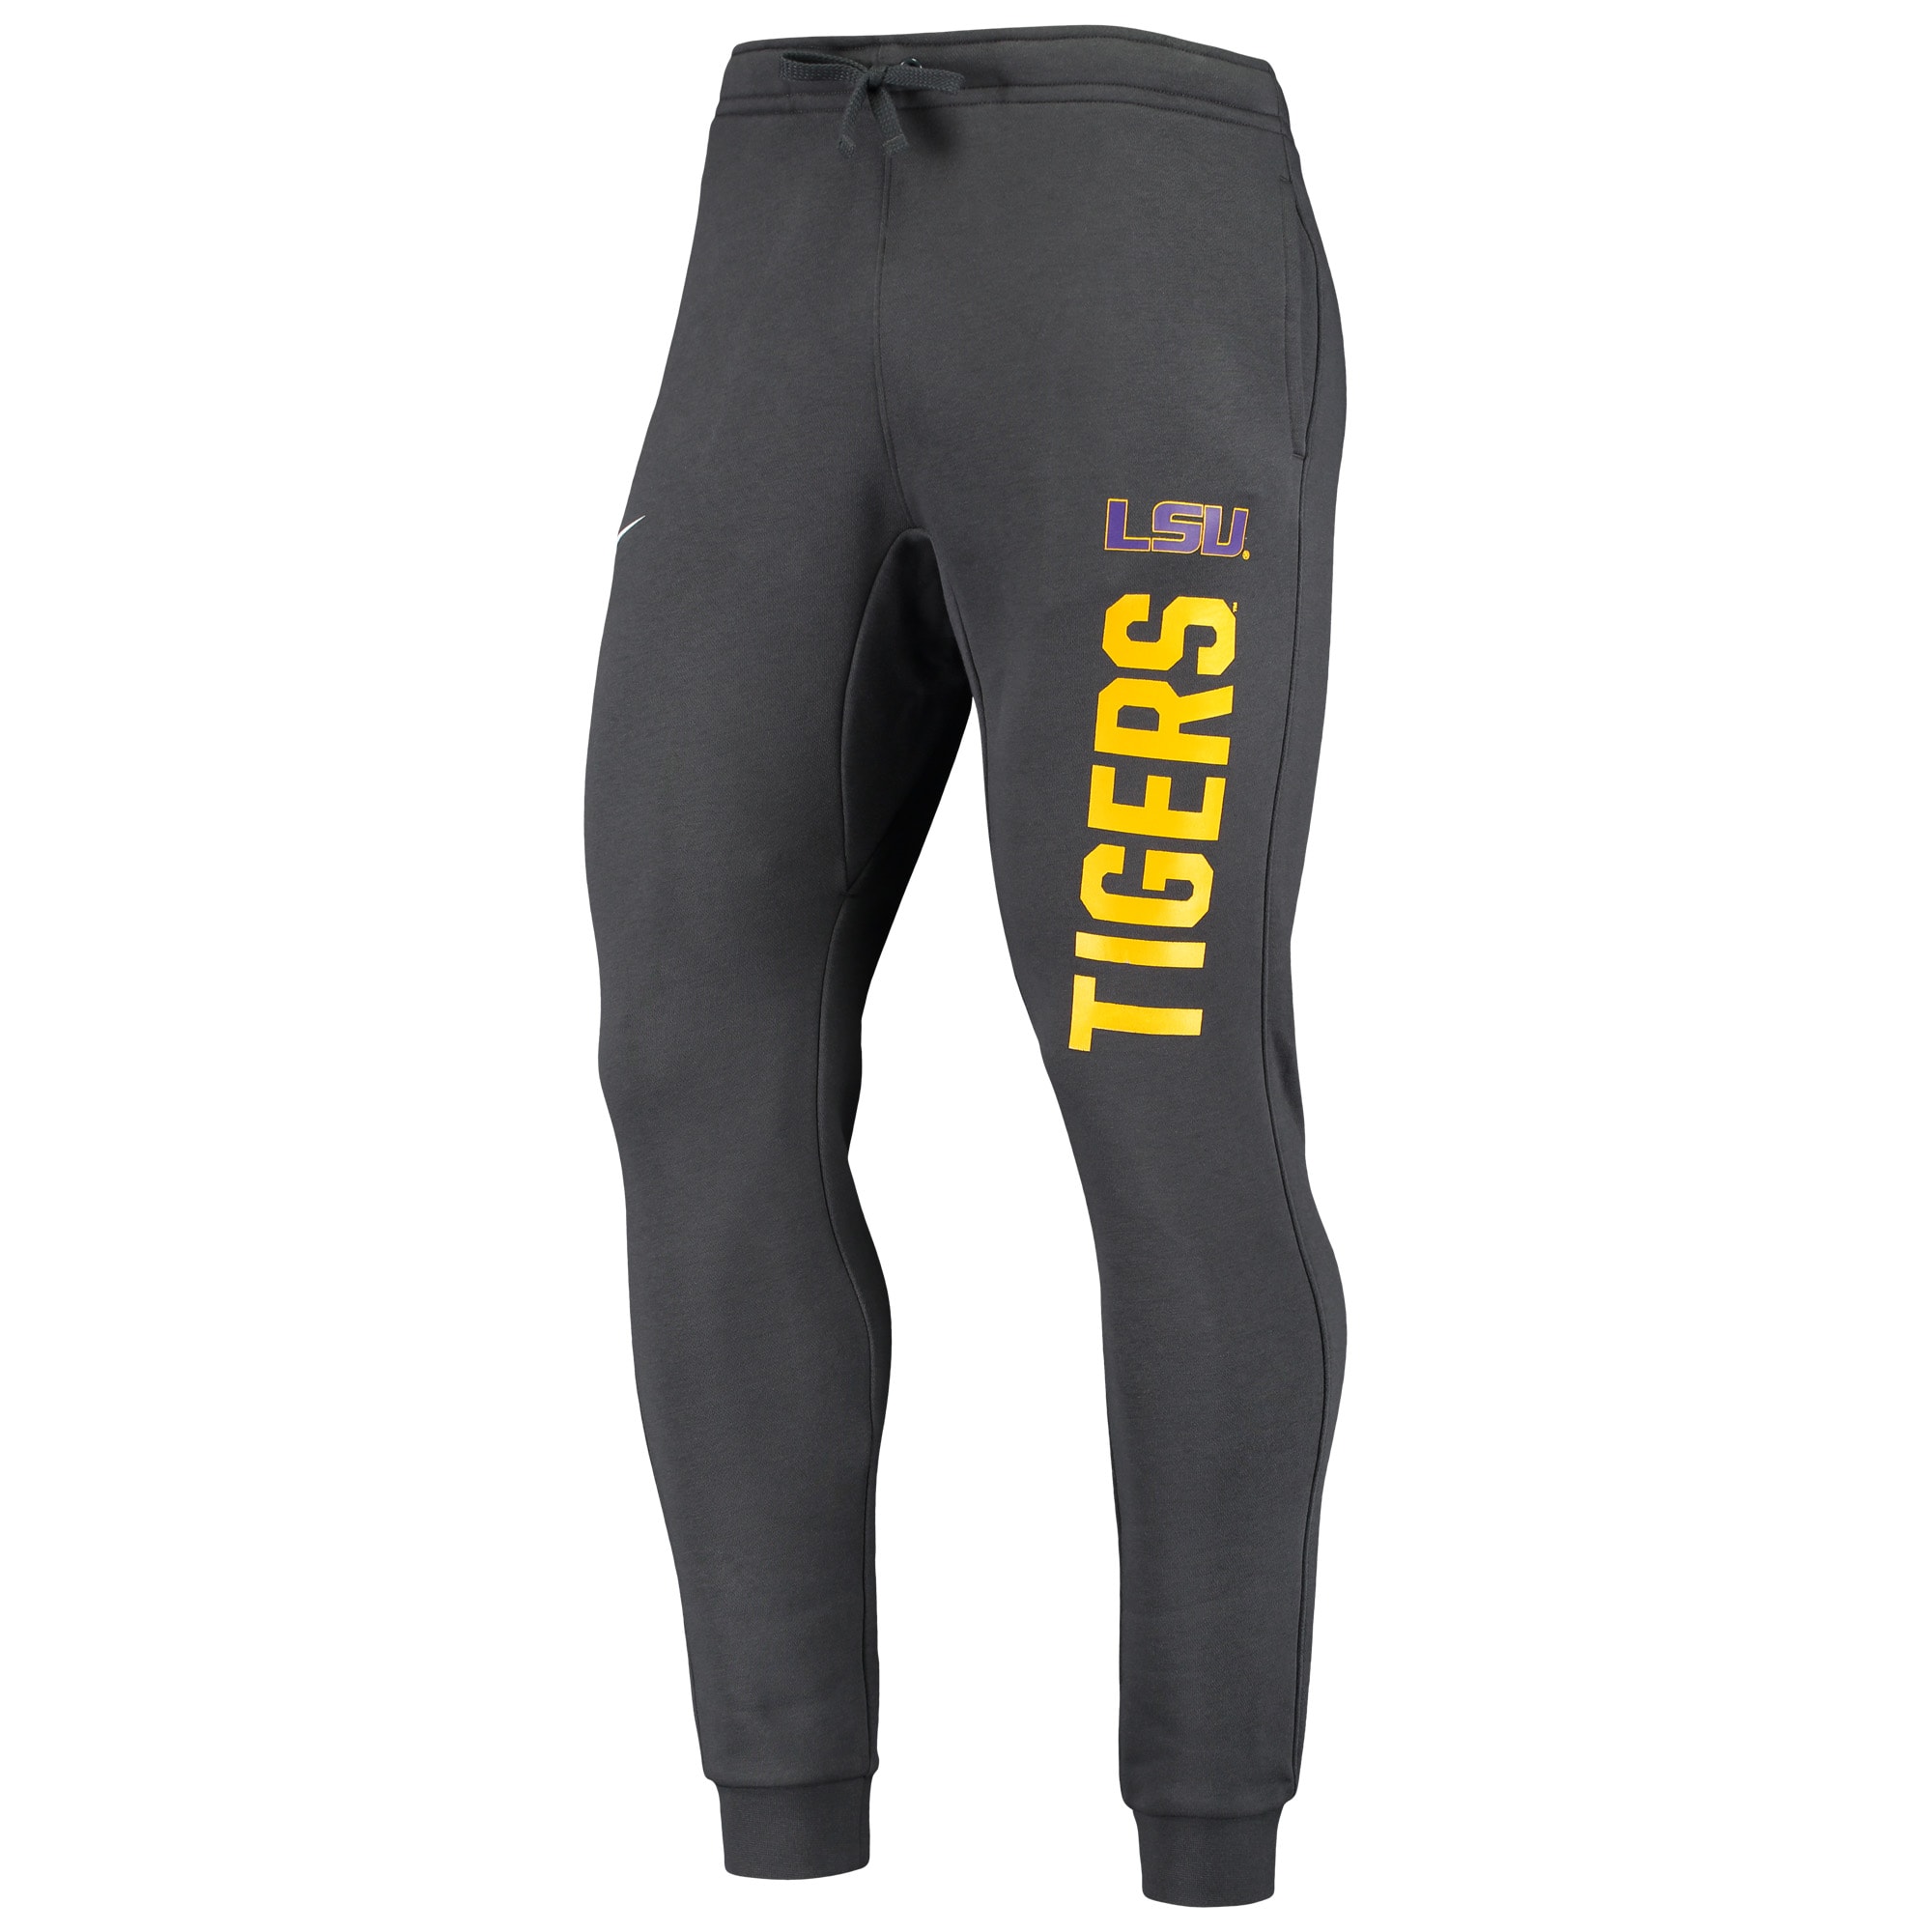 Men's Nike Anthracite LSU Tigers Primary Logo Club Fleece Joggers - image 2 of 3